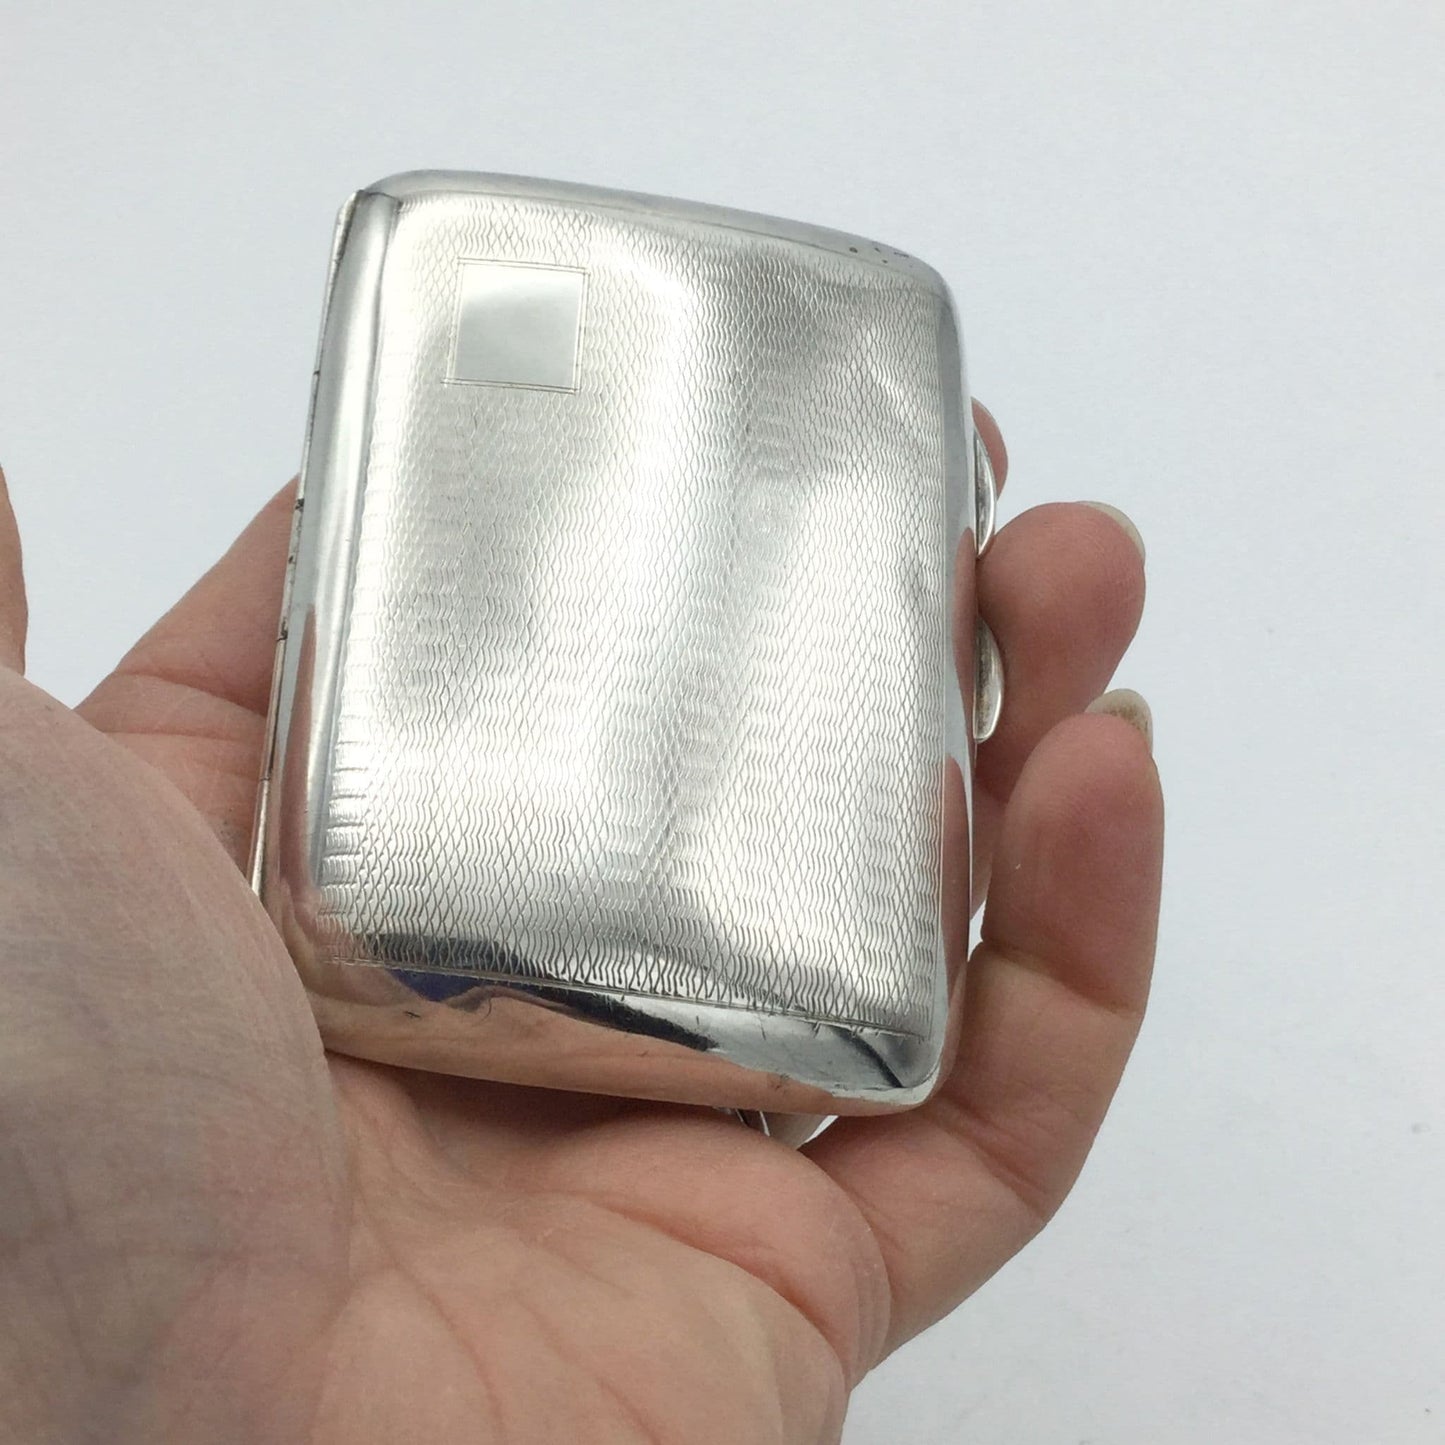 Small vintage silver cigarette case held in a hand